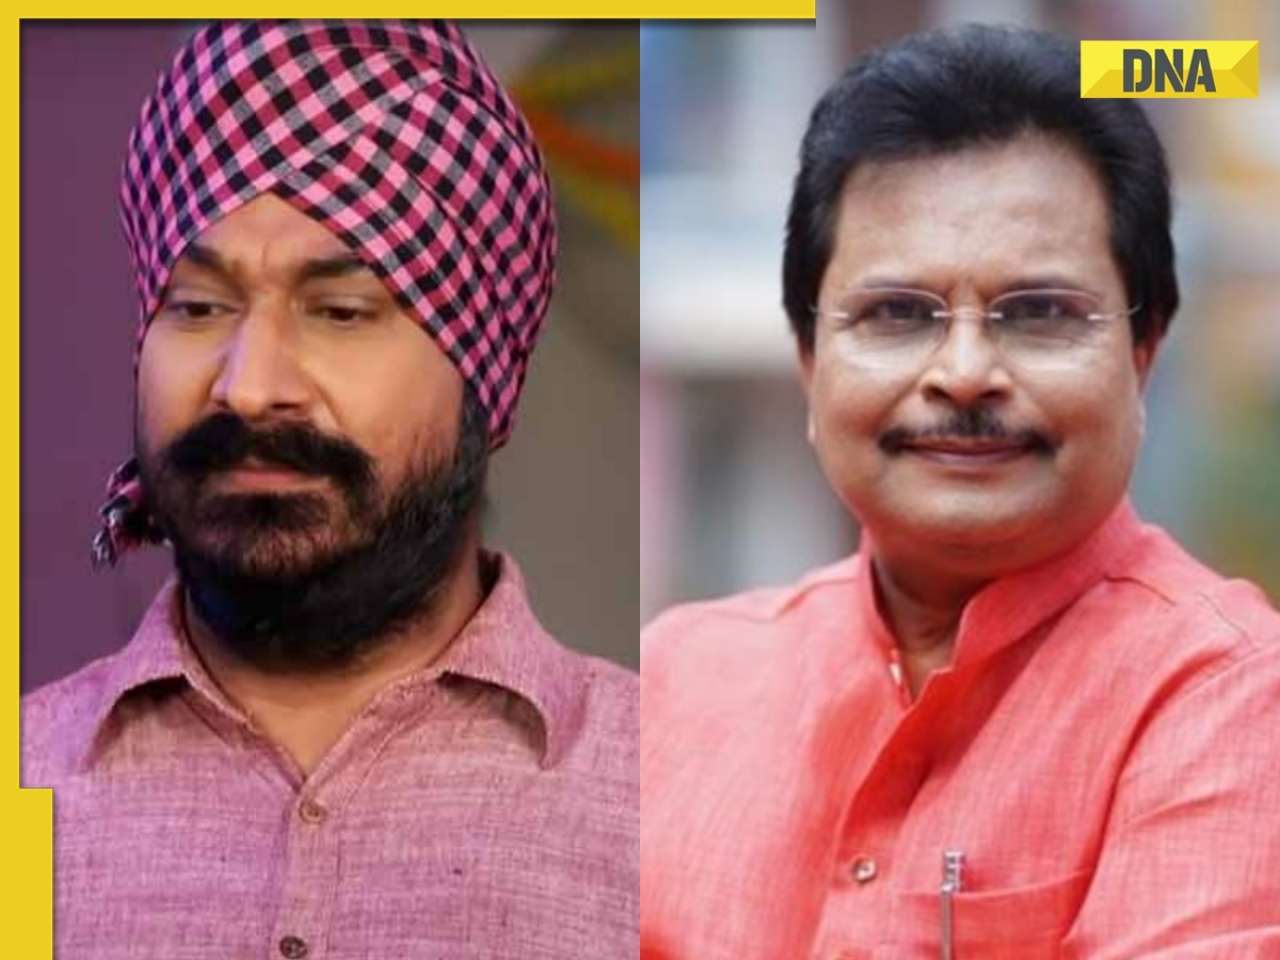 Gurucharan Singh is still unreachable after returning home, says Taarak Mehta producer Asit Modi: 'I have been trying..'